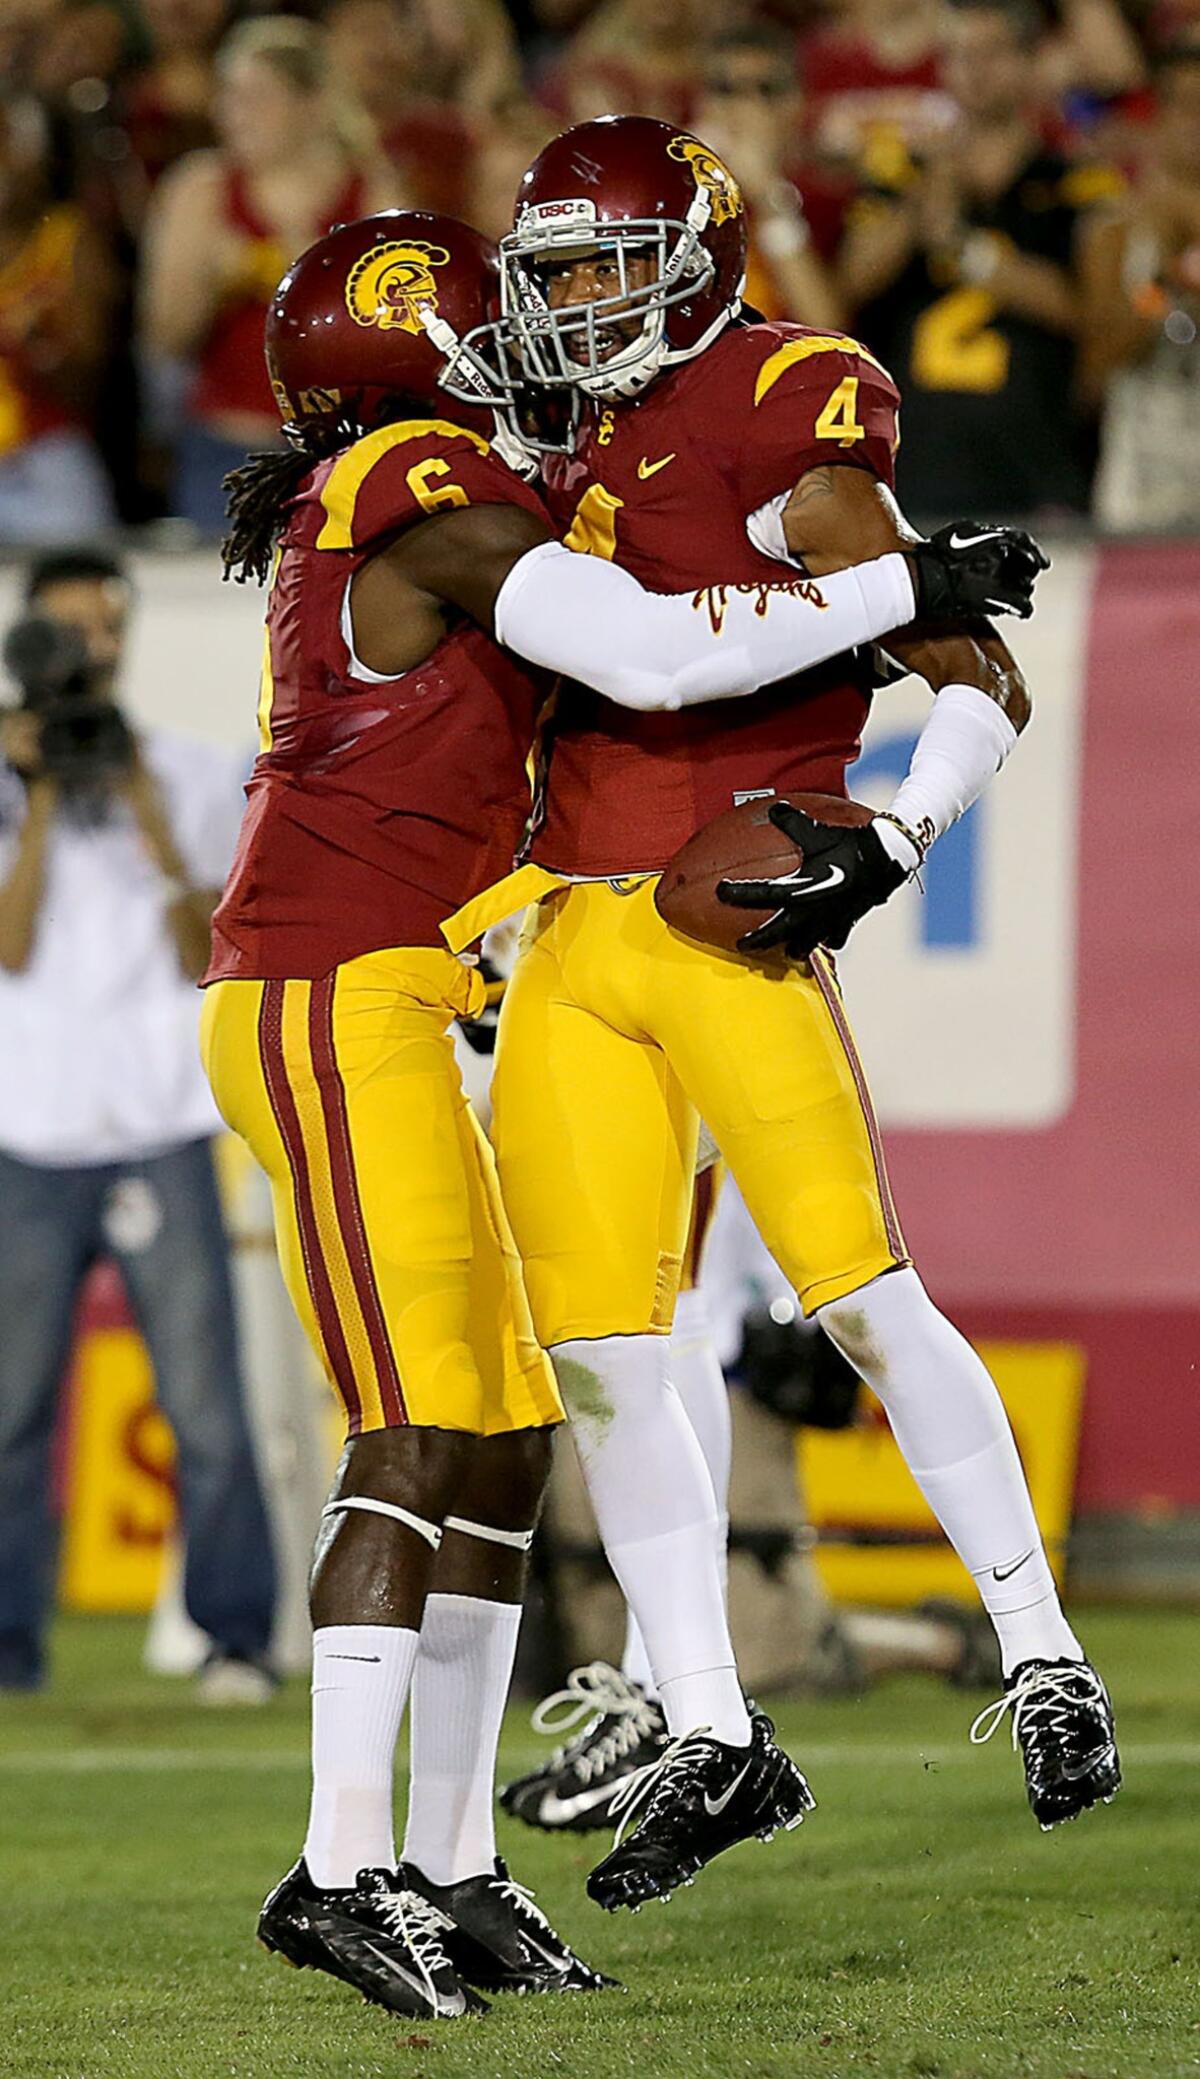 USC cornerback Torin Harris, right, is congratulated by teammate Josh Shaw after intercepting a pass against Washington State on Saturday. The Trojans will be looking for another strong defensive effort against Boston College this week.